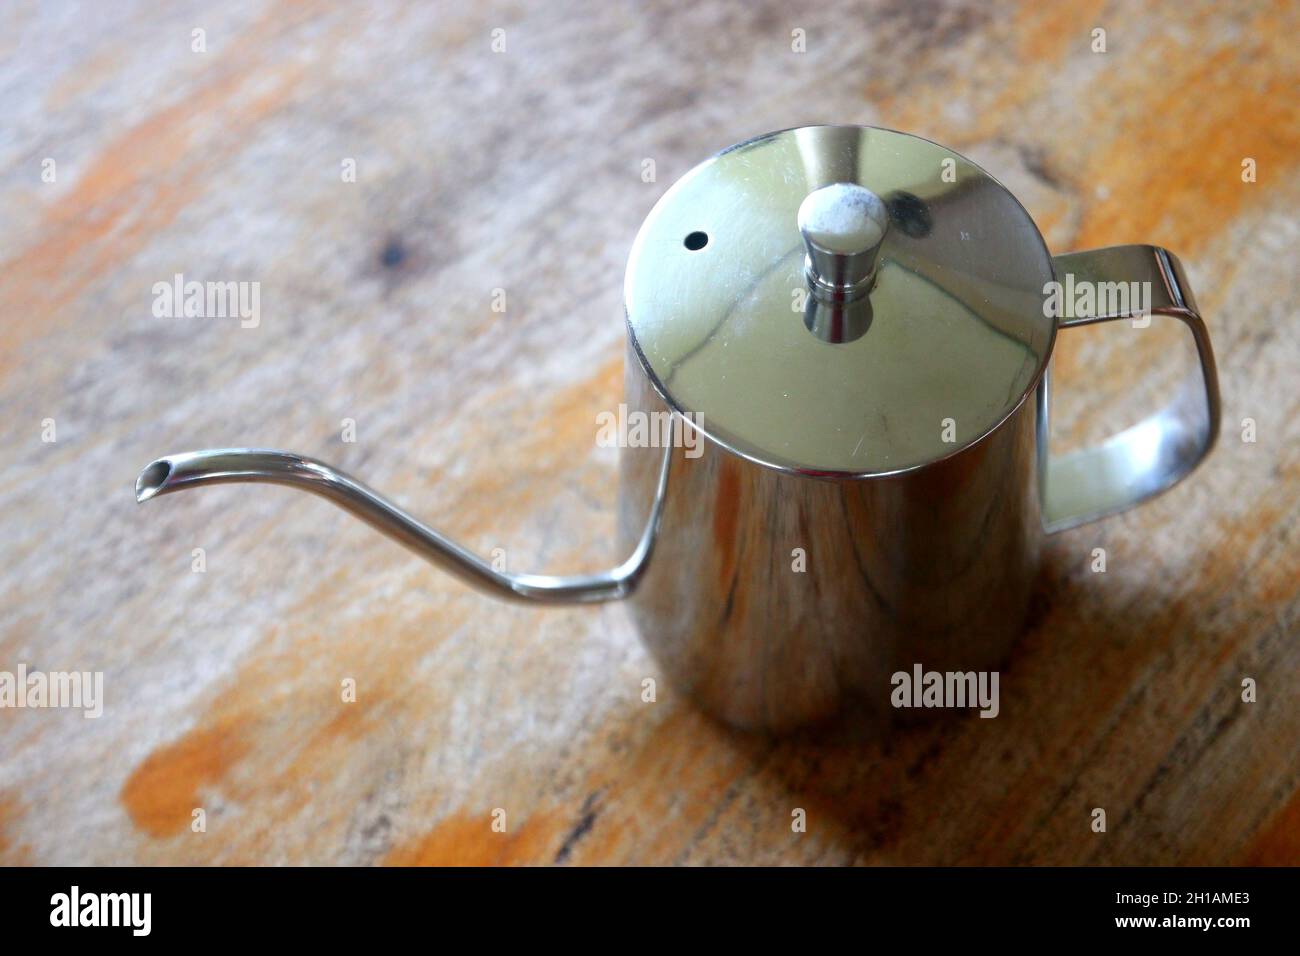 https://c8.alamy.com/comp/2H1AME3/stainless-steel-coffee-drip-kettle-jug-on-wooden-table-2H1AME3.jpg